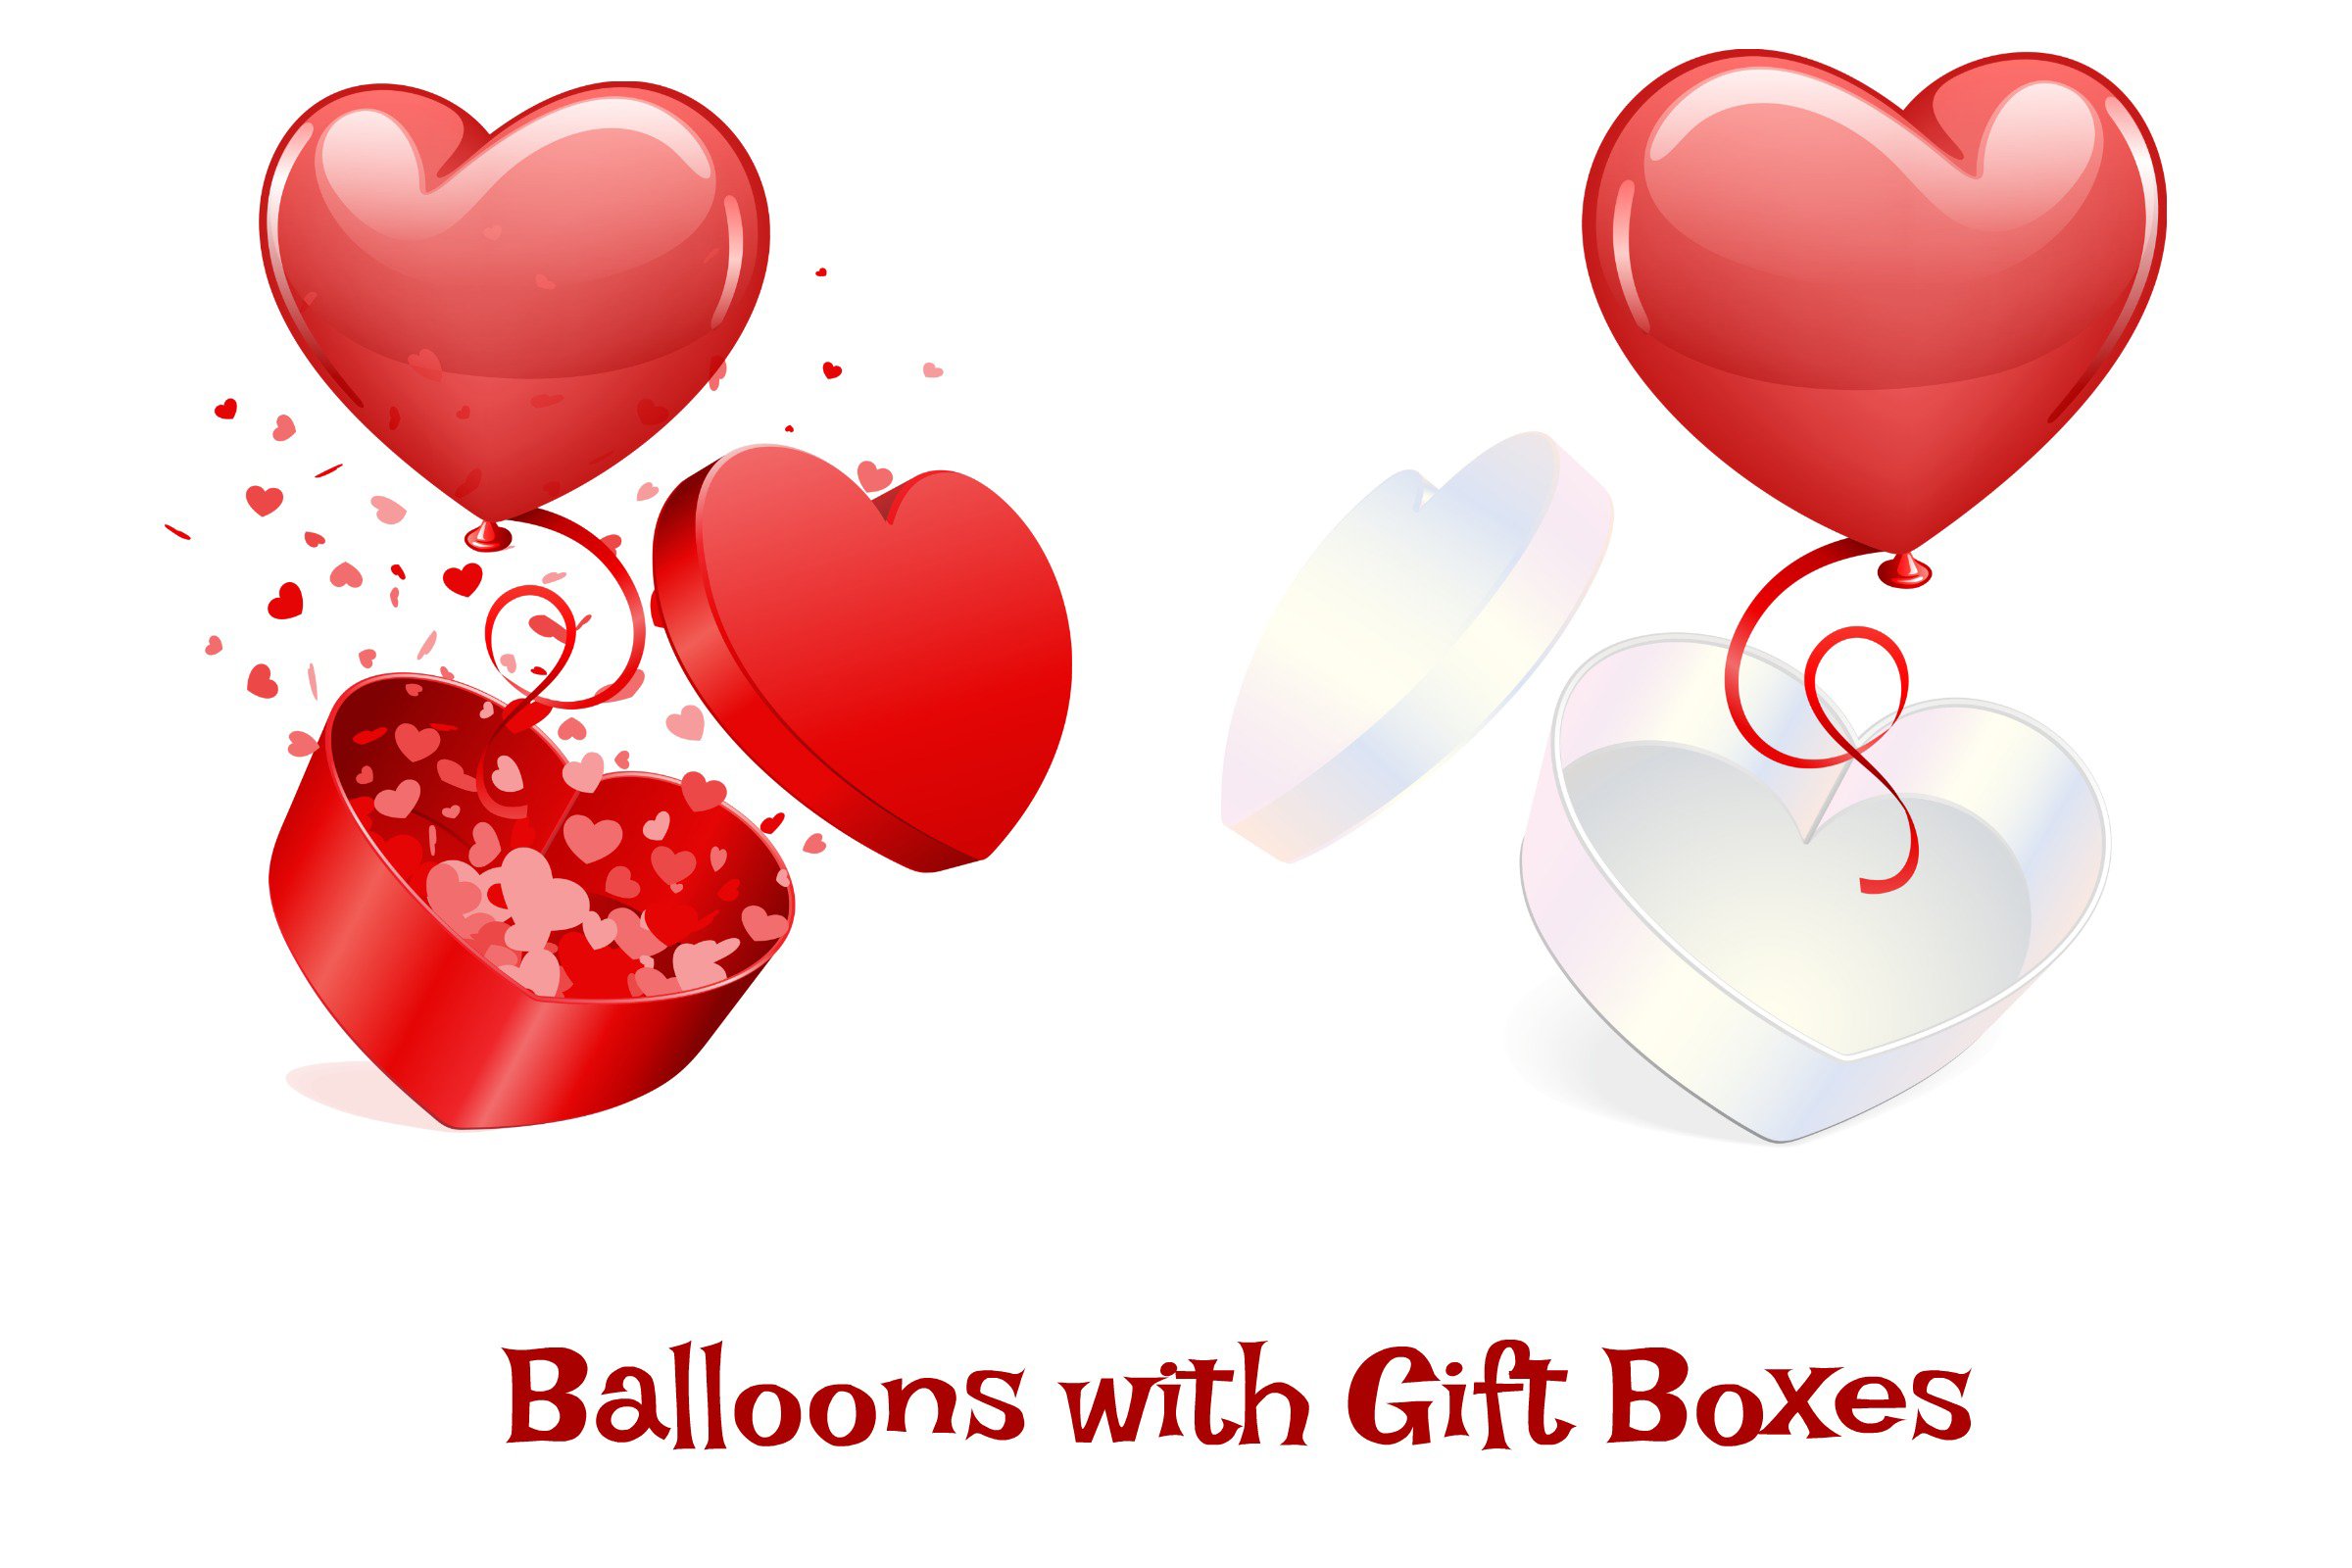 Balloons with gift boxes.